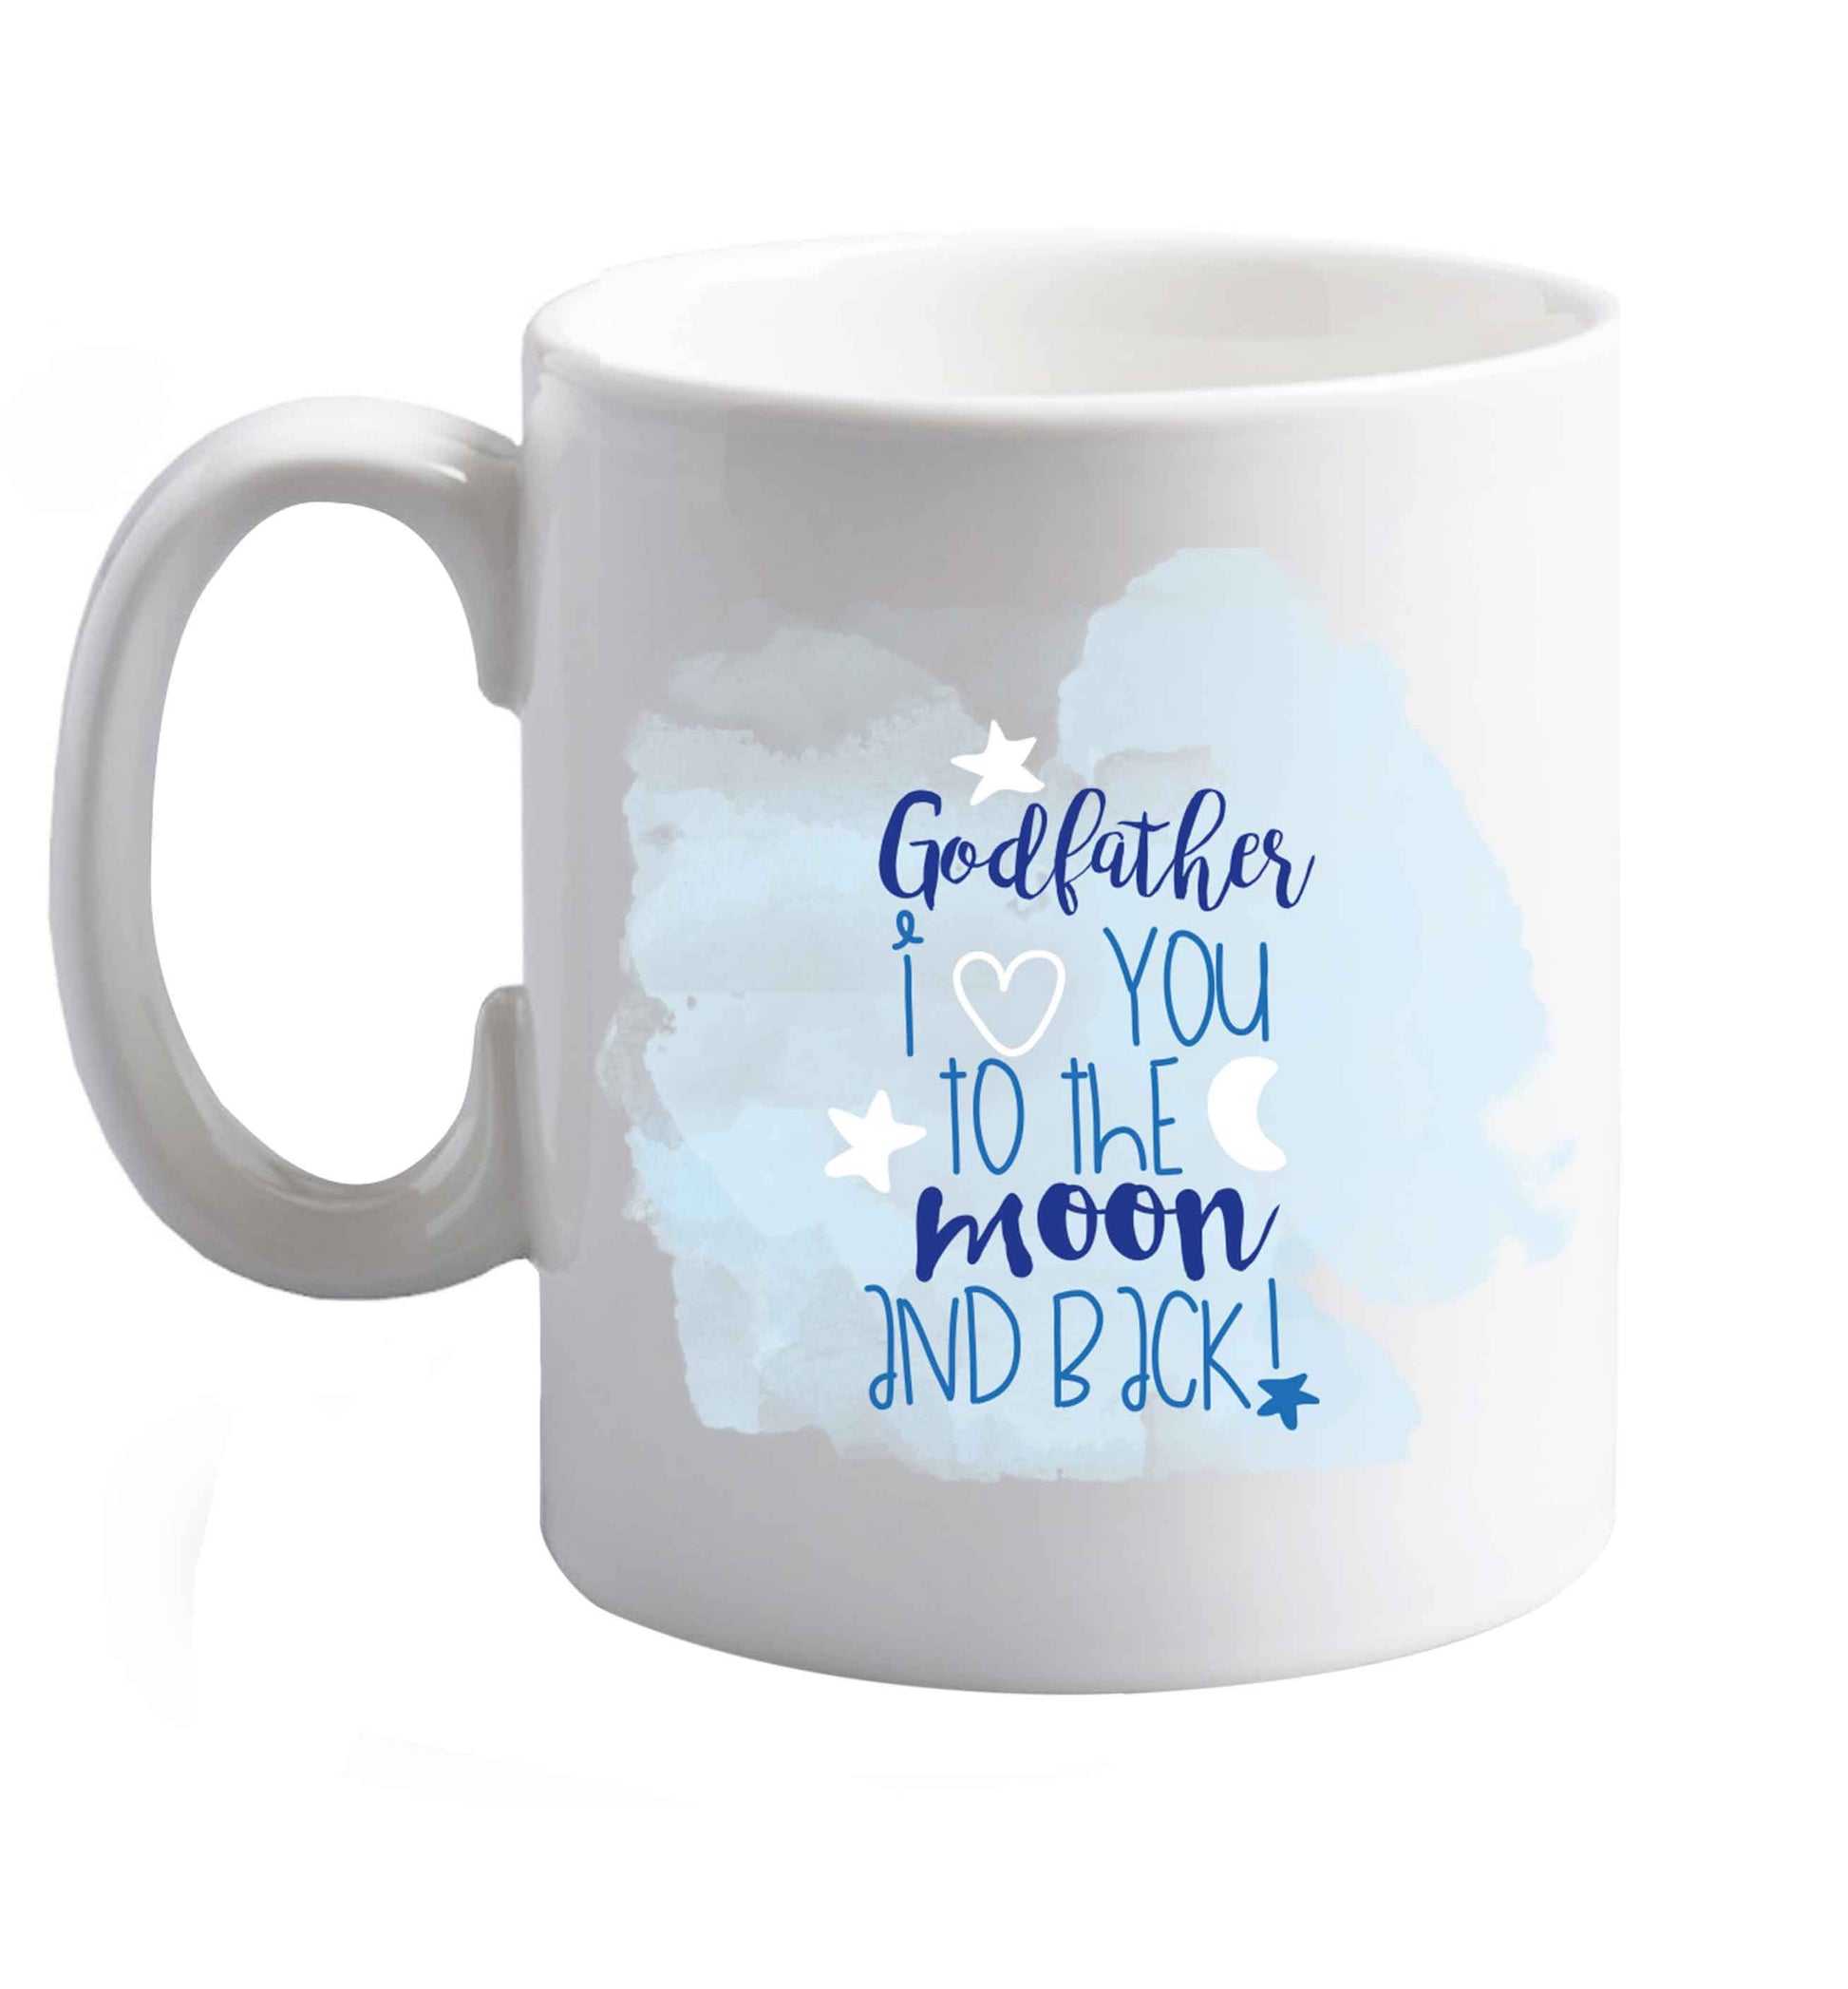 10 oz Godfather I love you to the moon and back  ceramic mug right handed